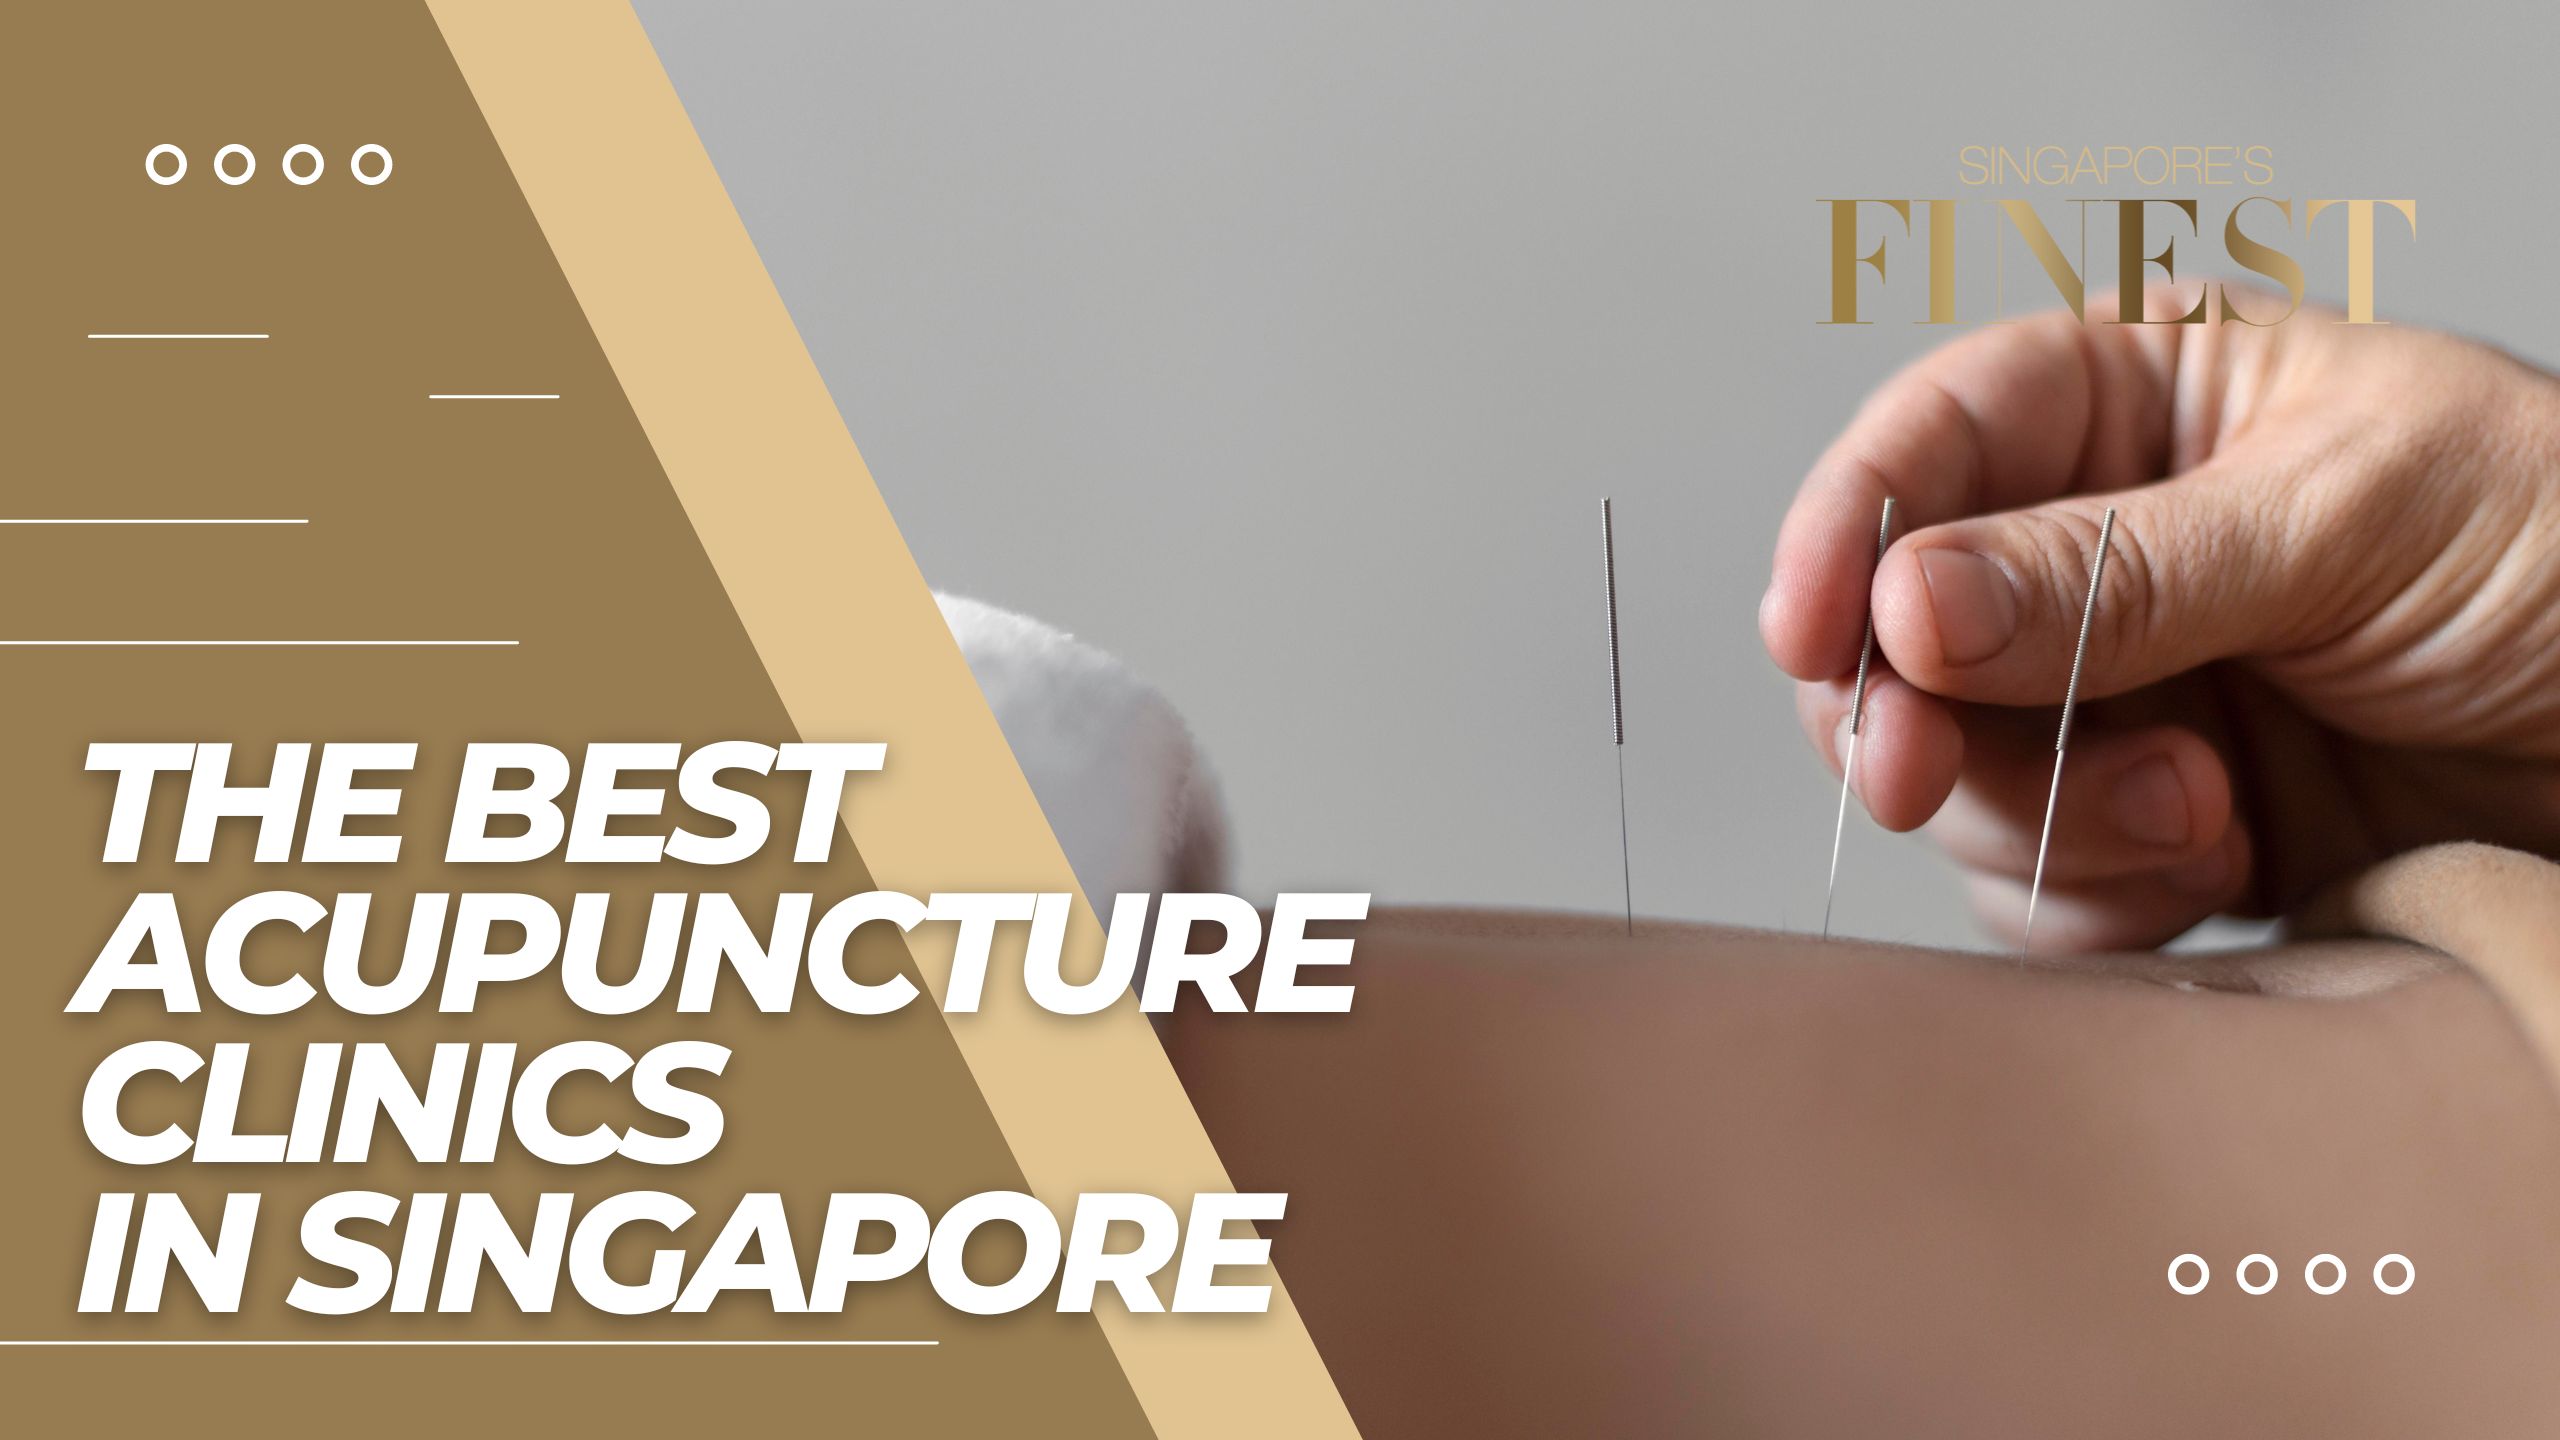 The Finest Acupuncture Clinics in Singapore